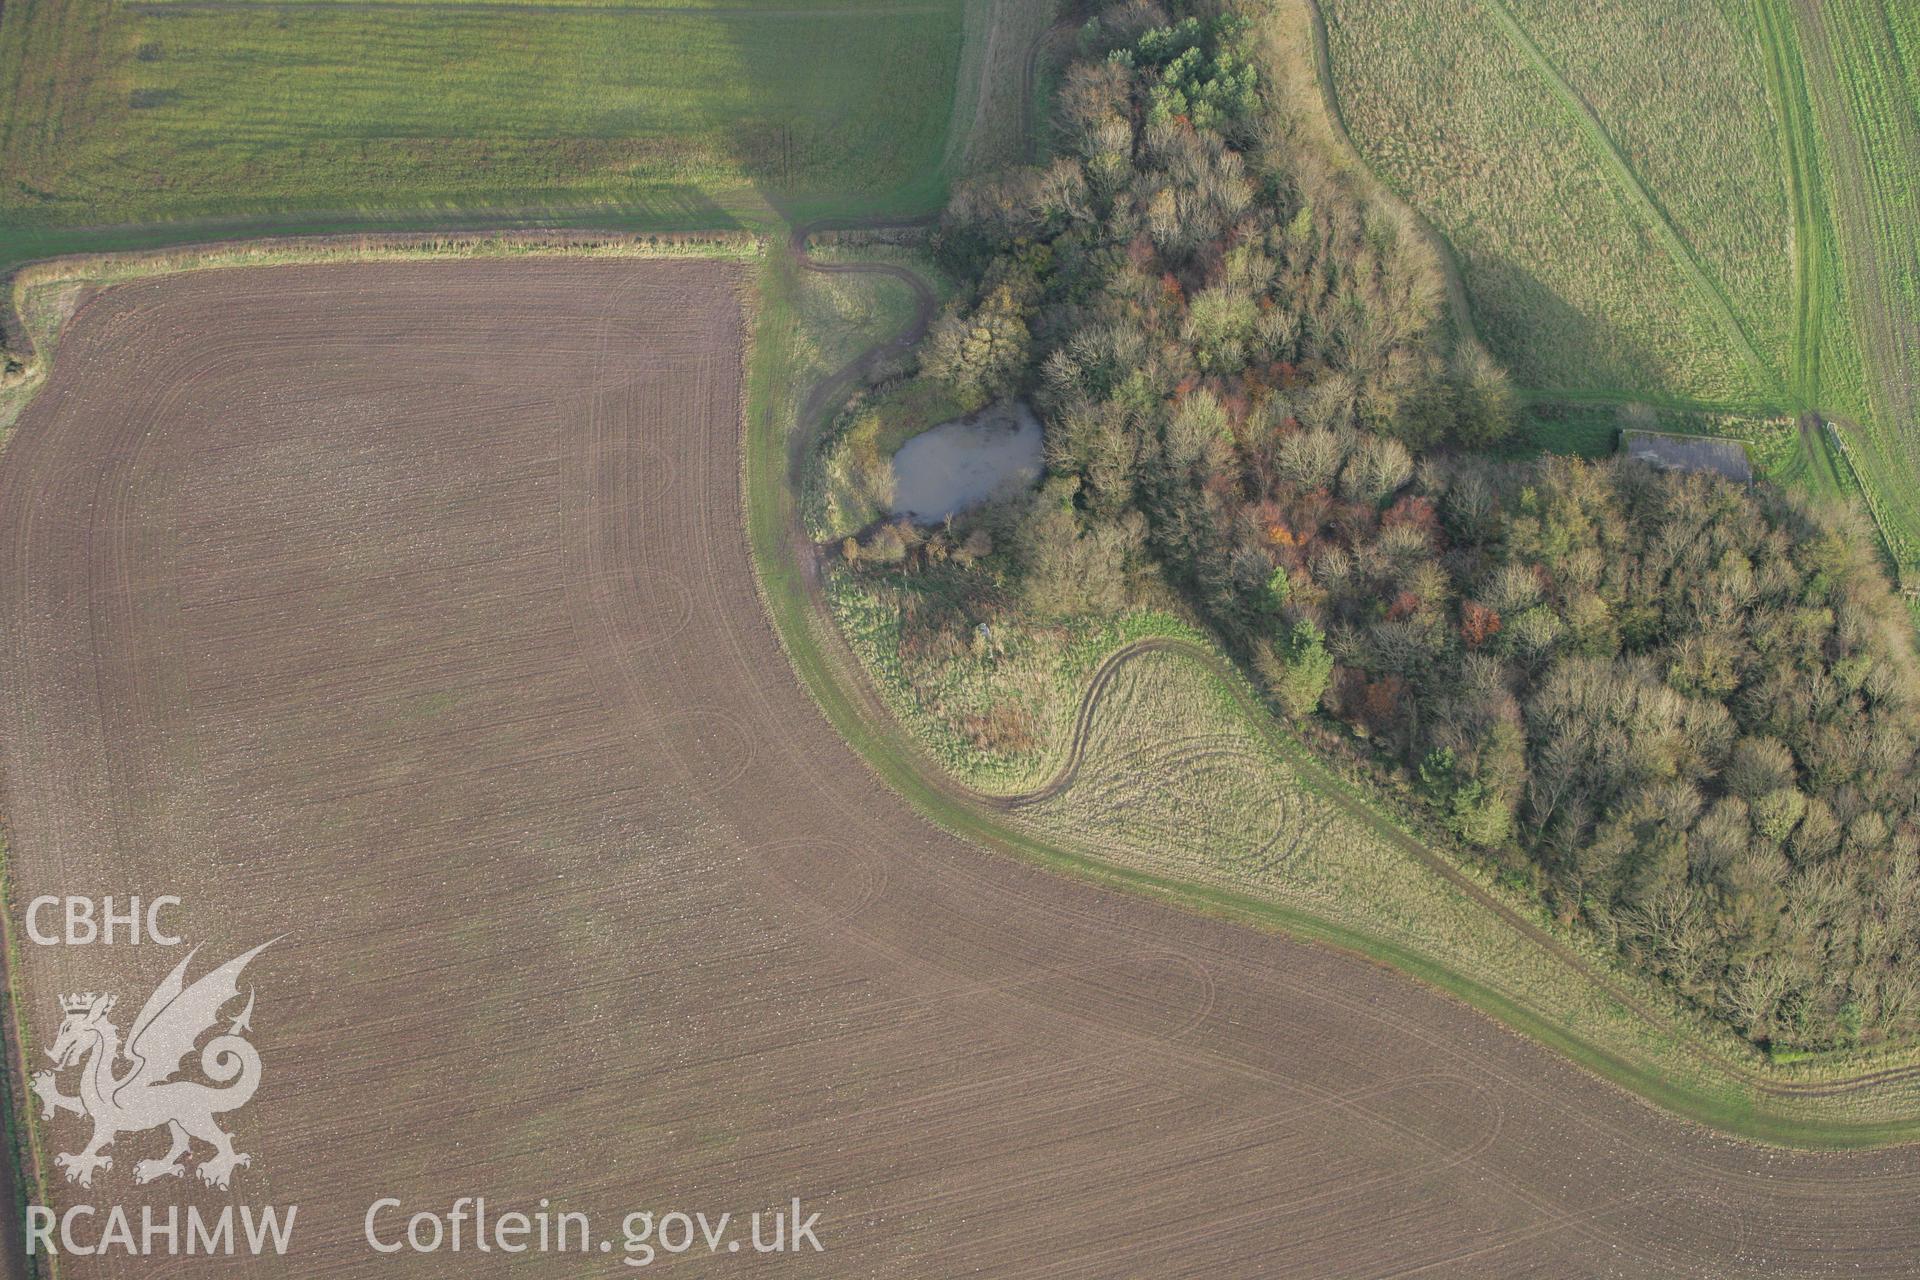 RCAHMW colour oblique photograph of Tythegston Long Barrow. Taken by Toby Driver on 12/11/2008.